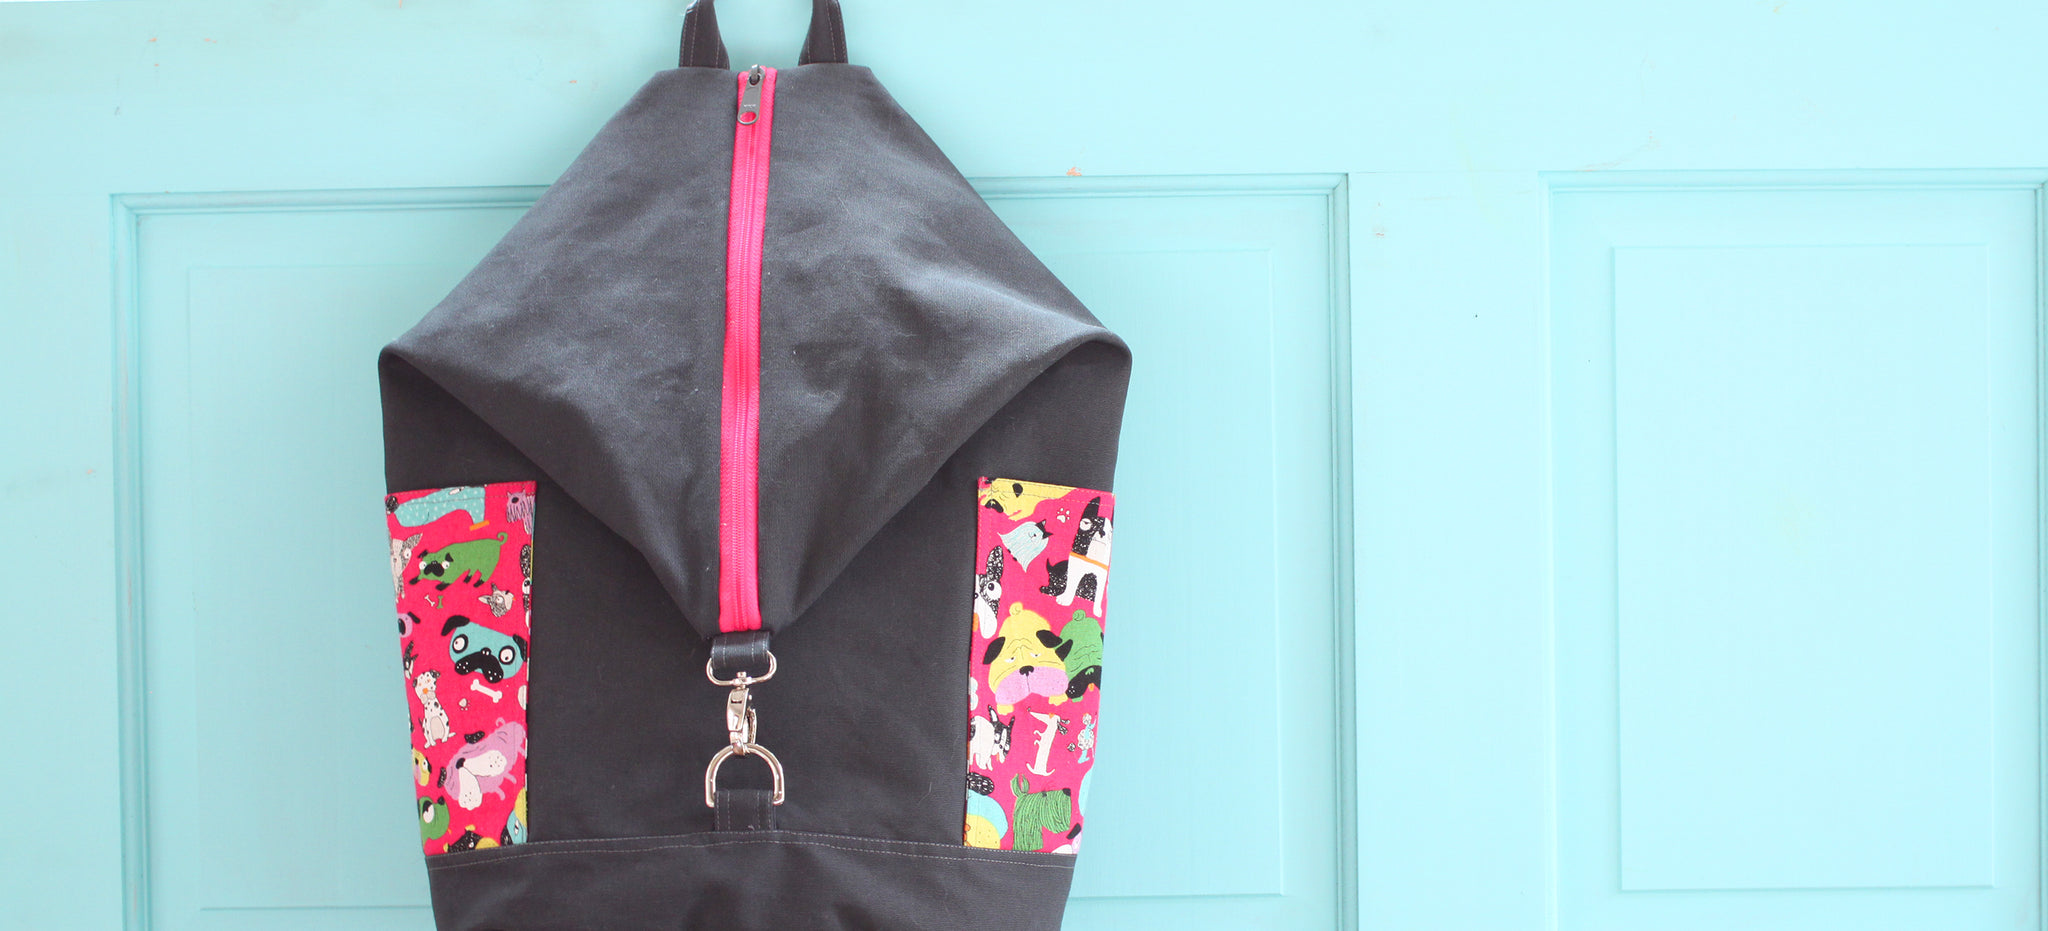 Introducing the Bugsy Backpack!